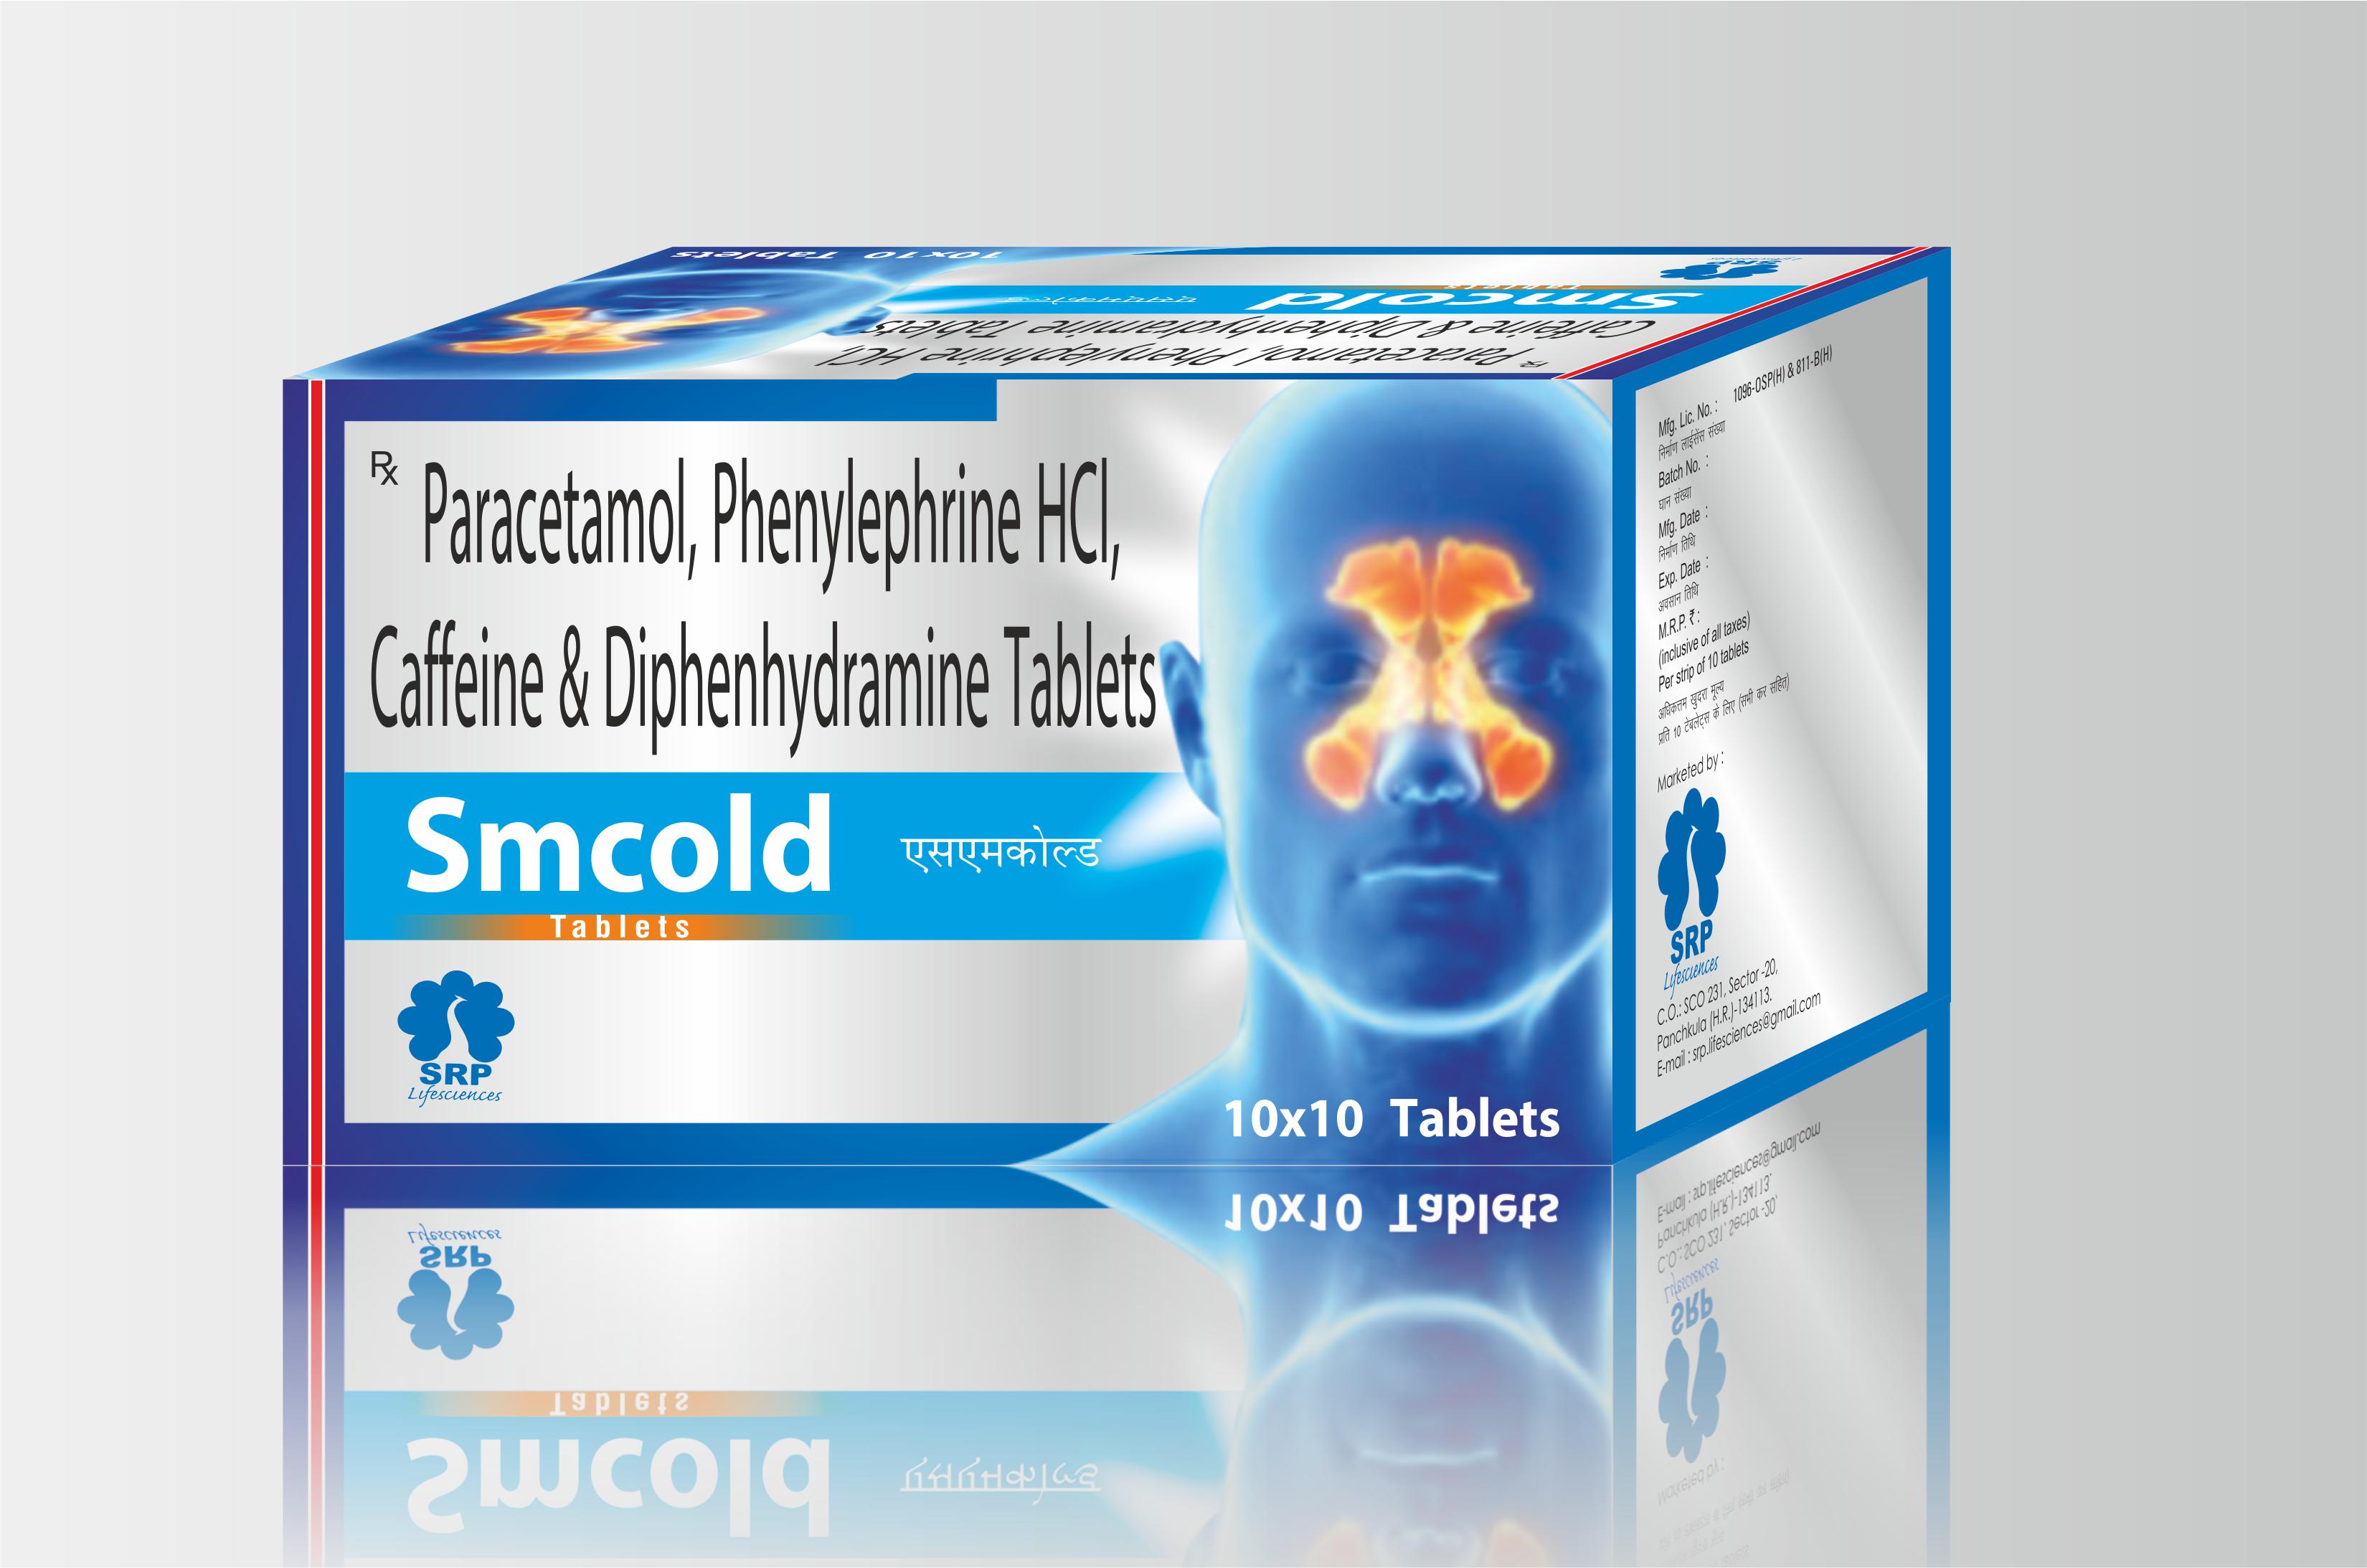 Product Name: SMCOLD, Compositions of SMCOLD are Paracetamol, Phenylephrine Hcl, Caffeine & Diphenhydramine Tablets - Cynak Healthcare